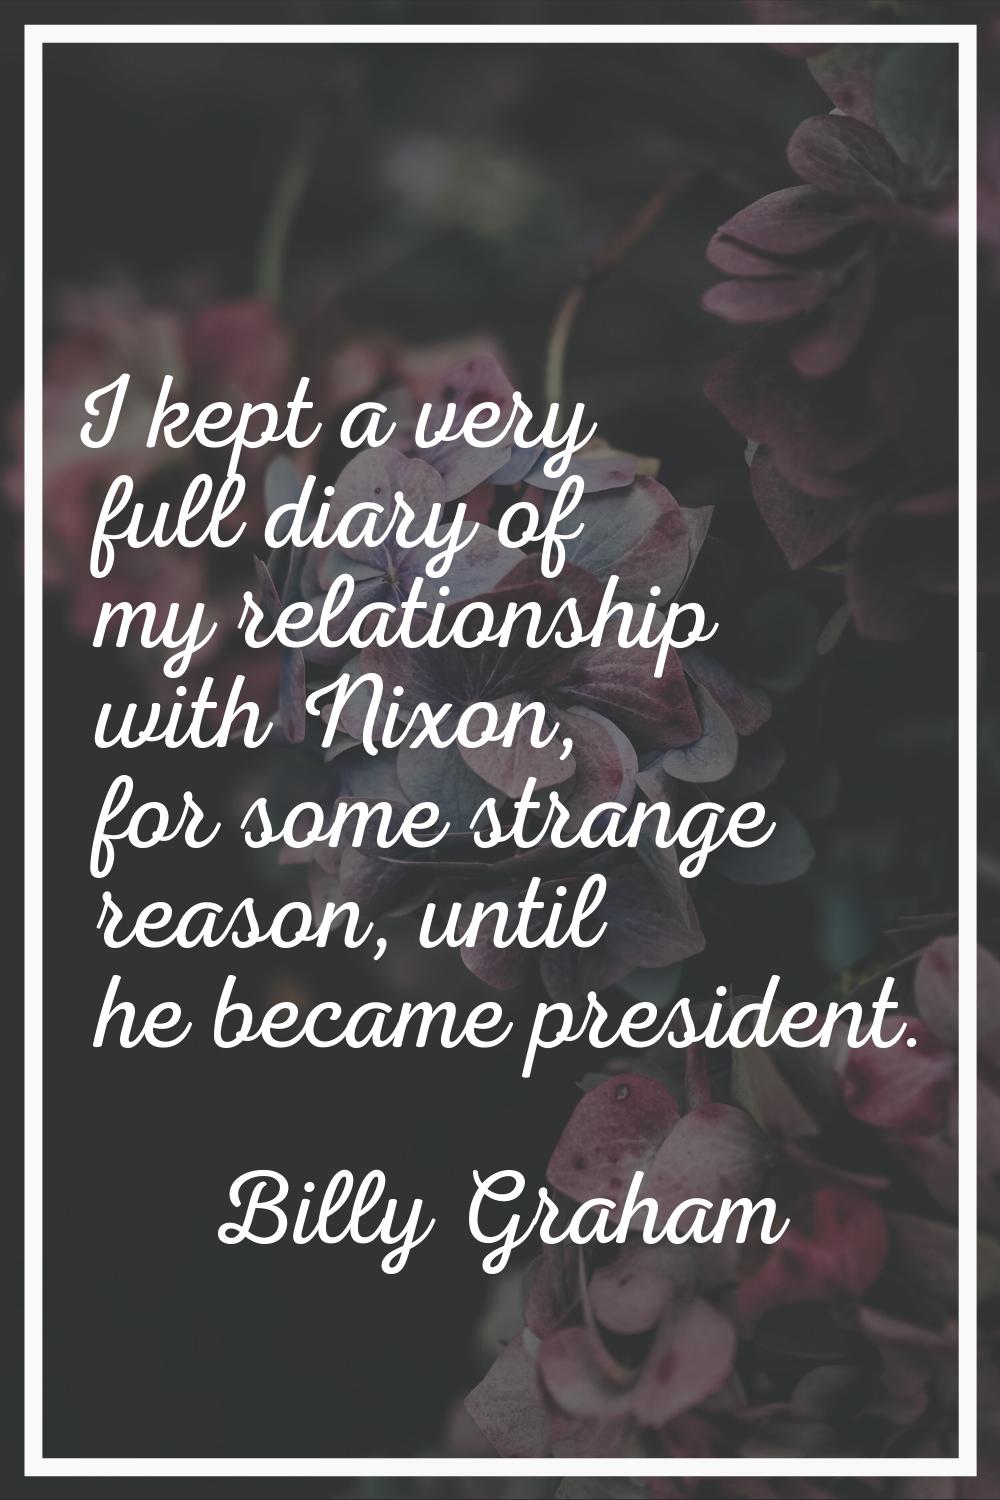 I kept a very full diary of my relationship with Nixon, for some strange reason, until he became pr